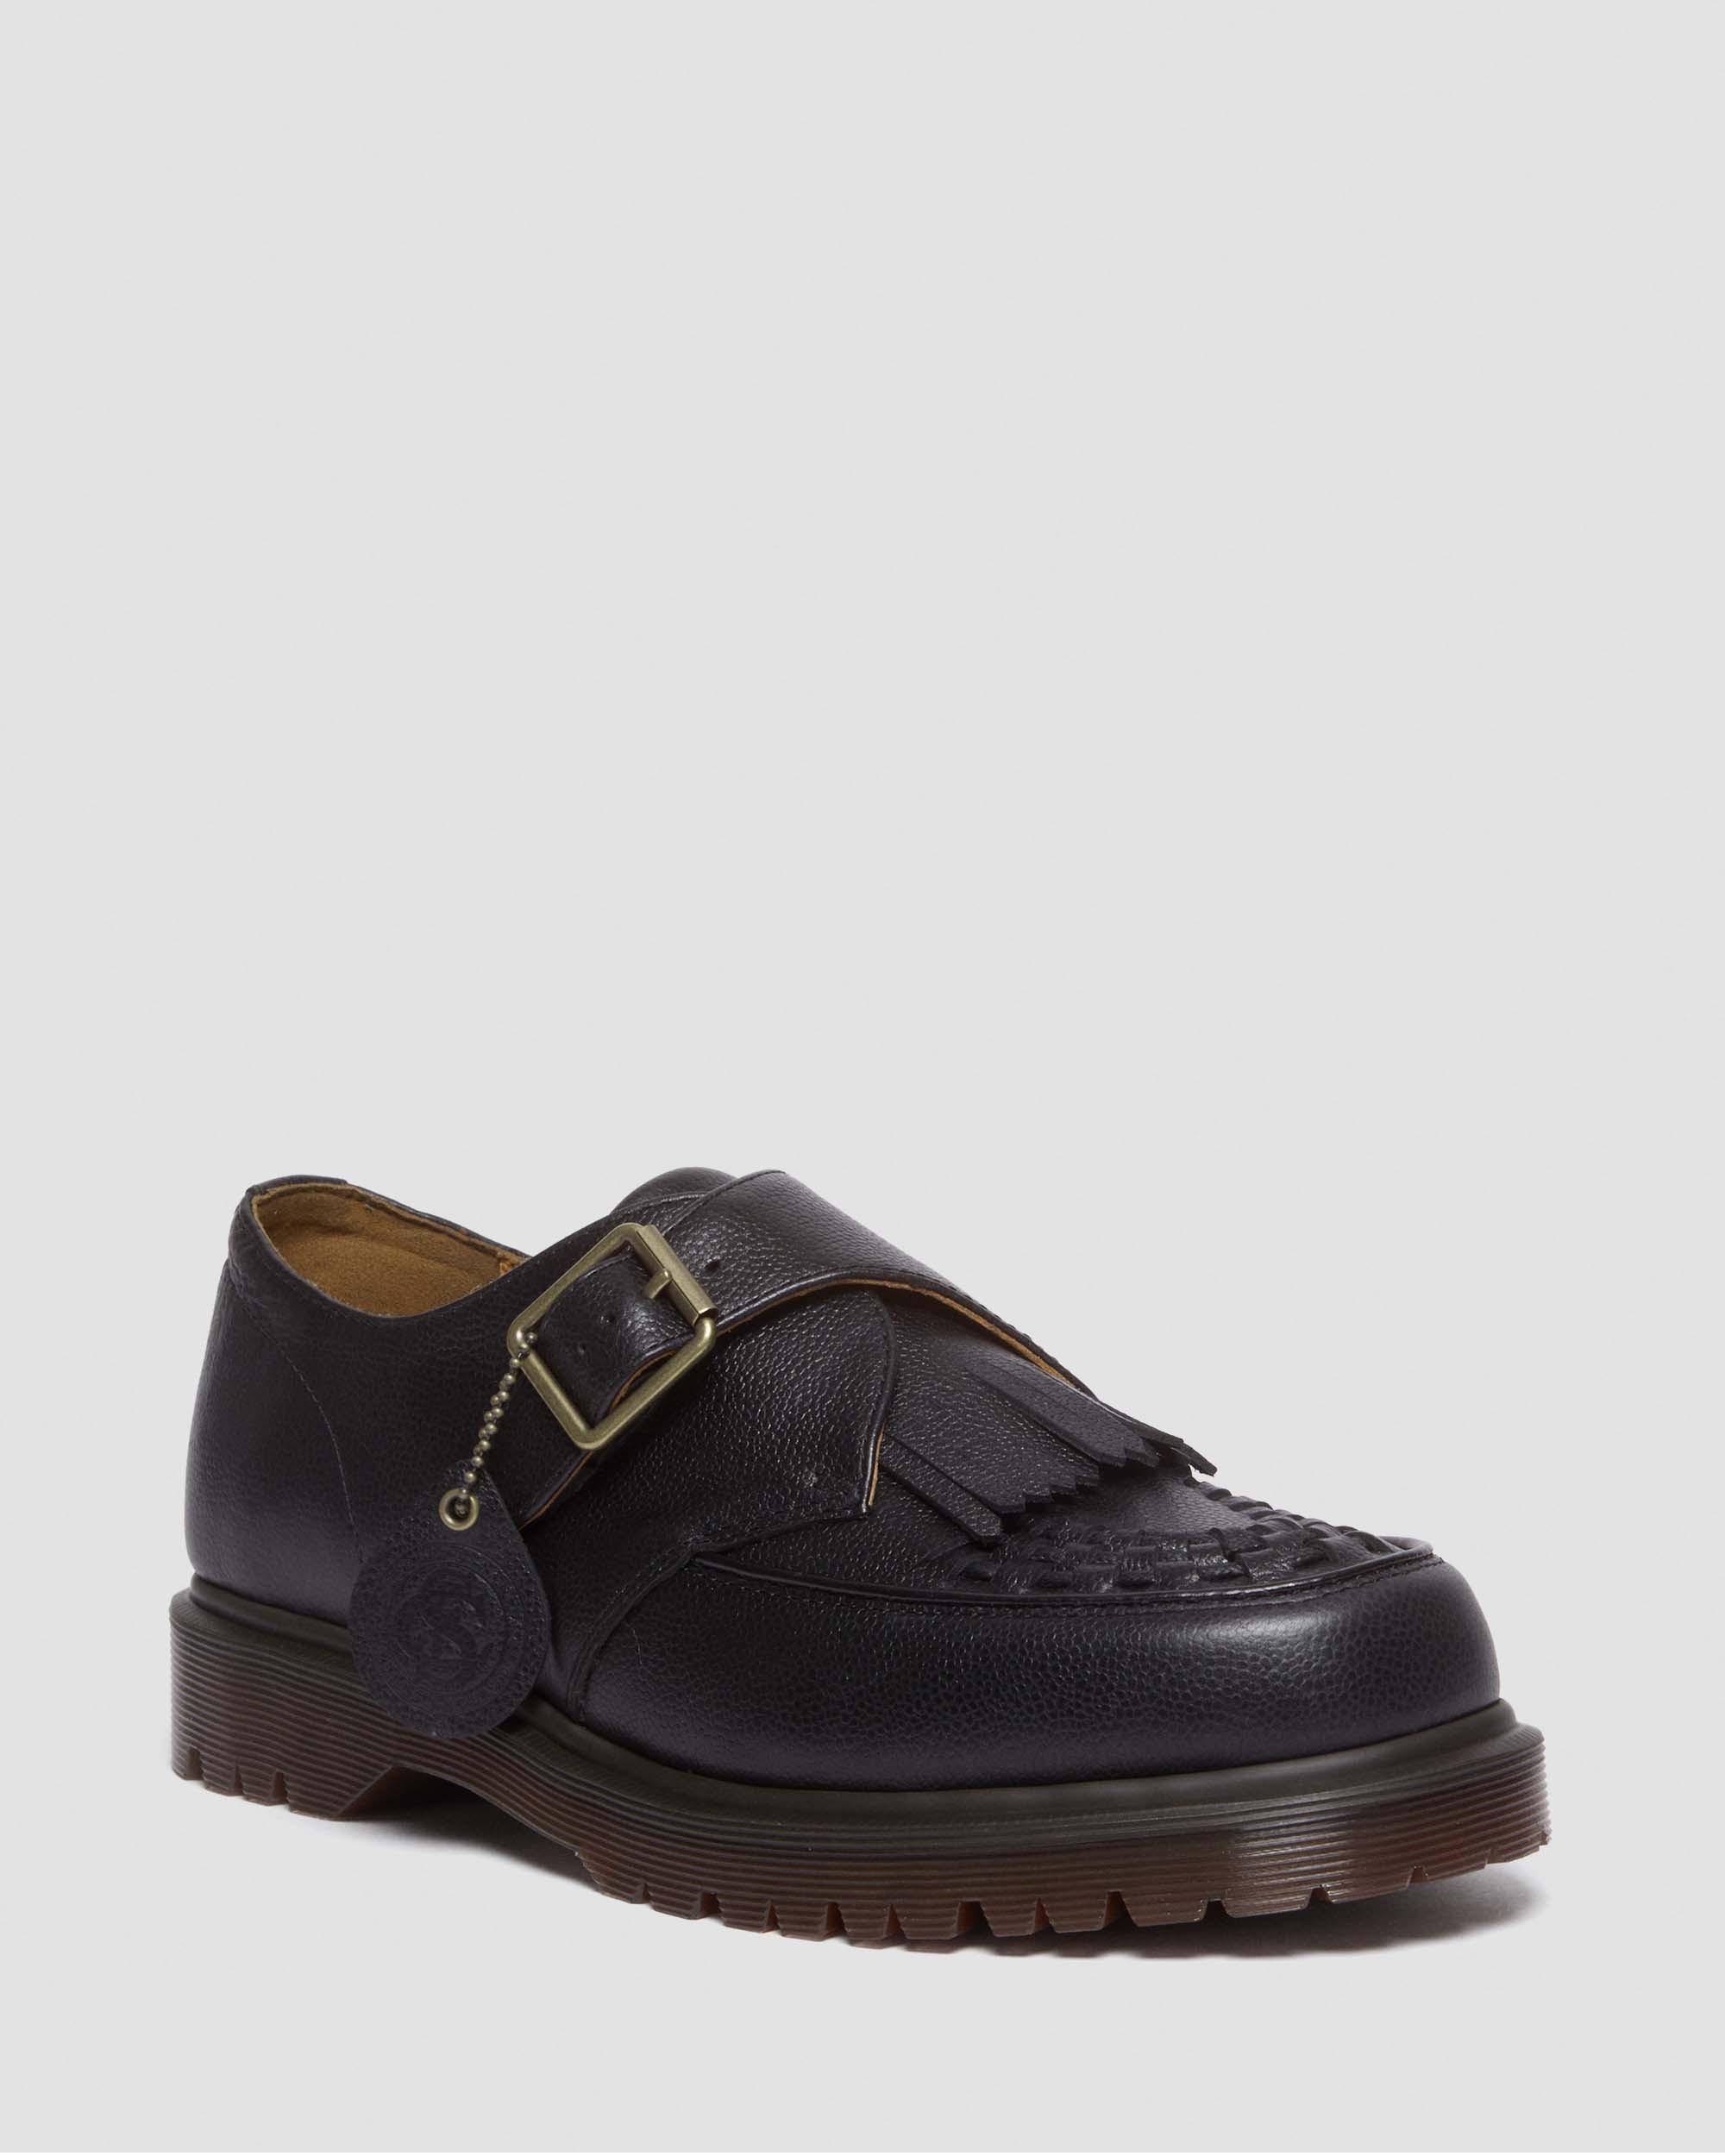 Ramsey Westminster Leather Buckle Creepers in Black